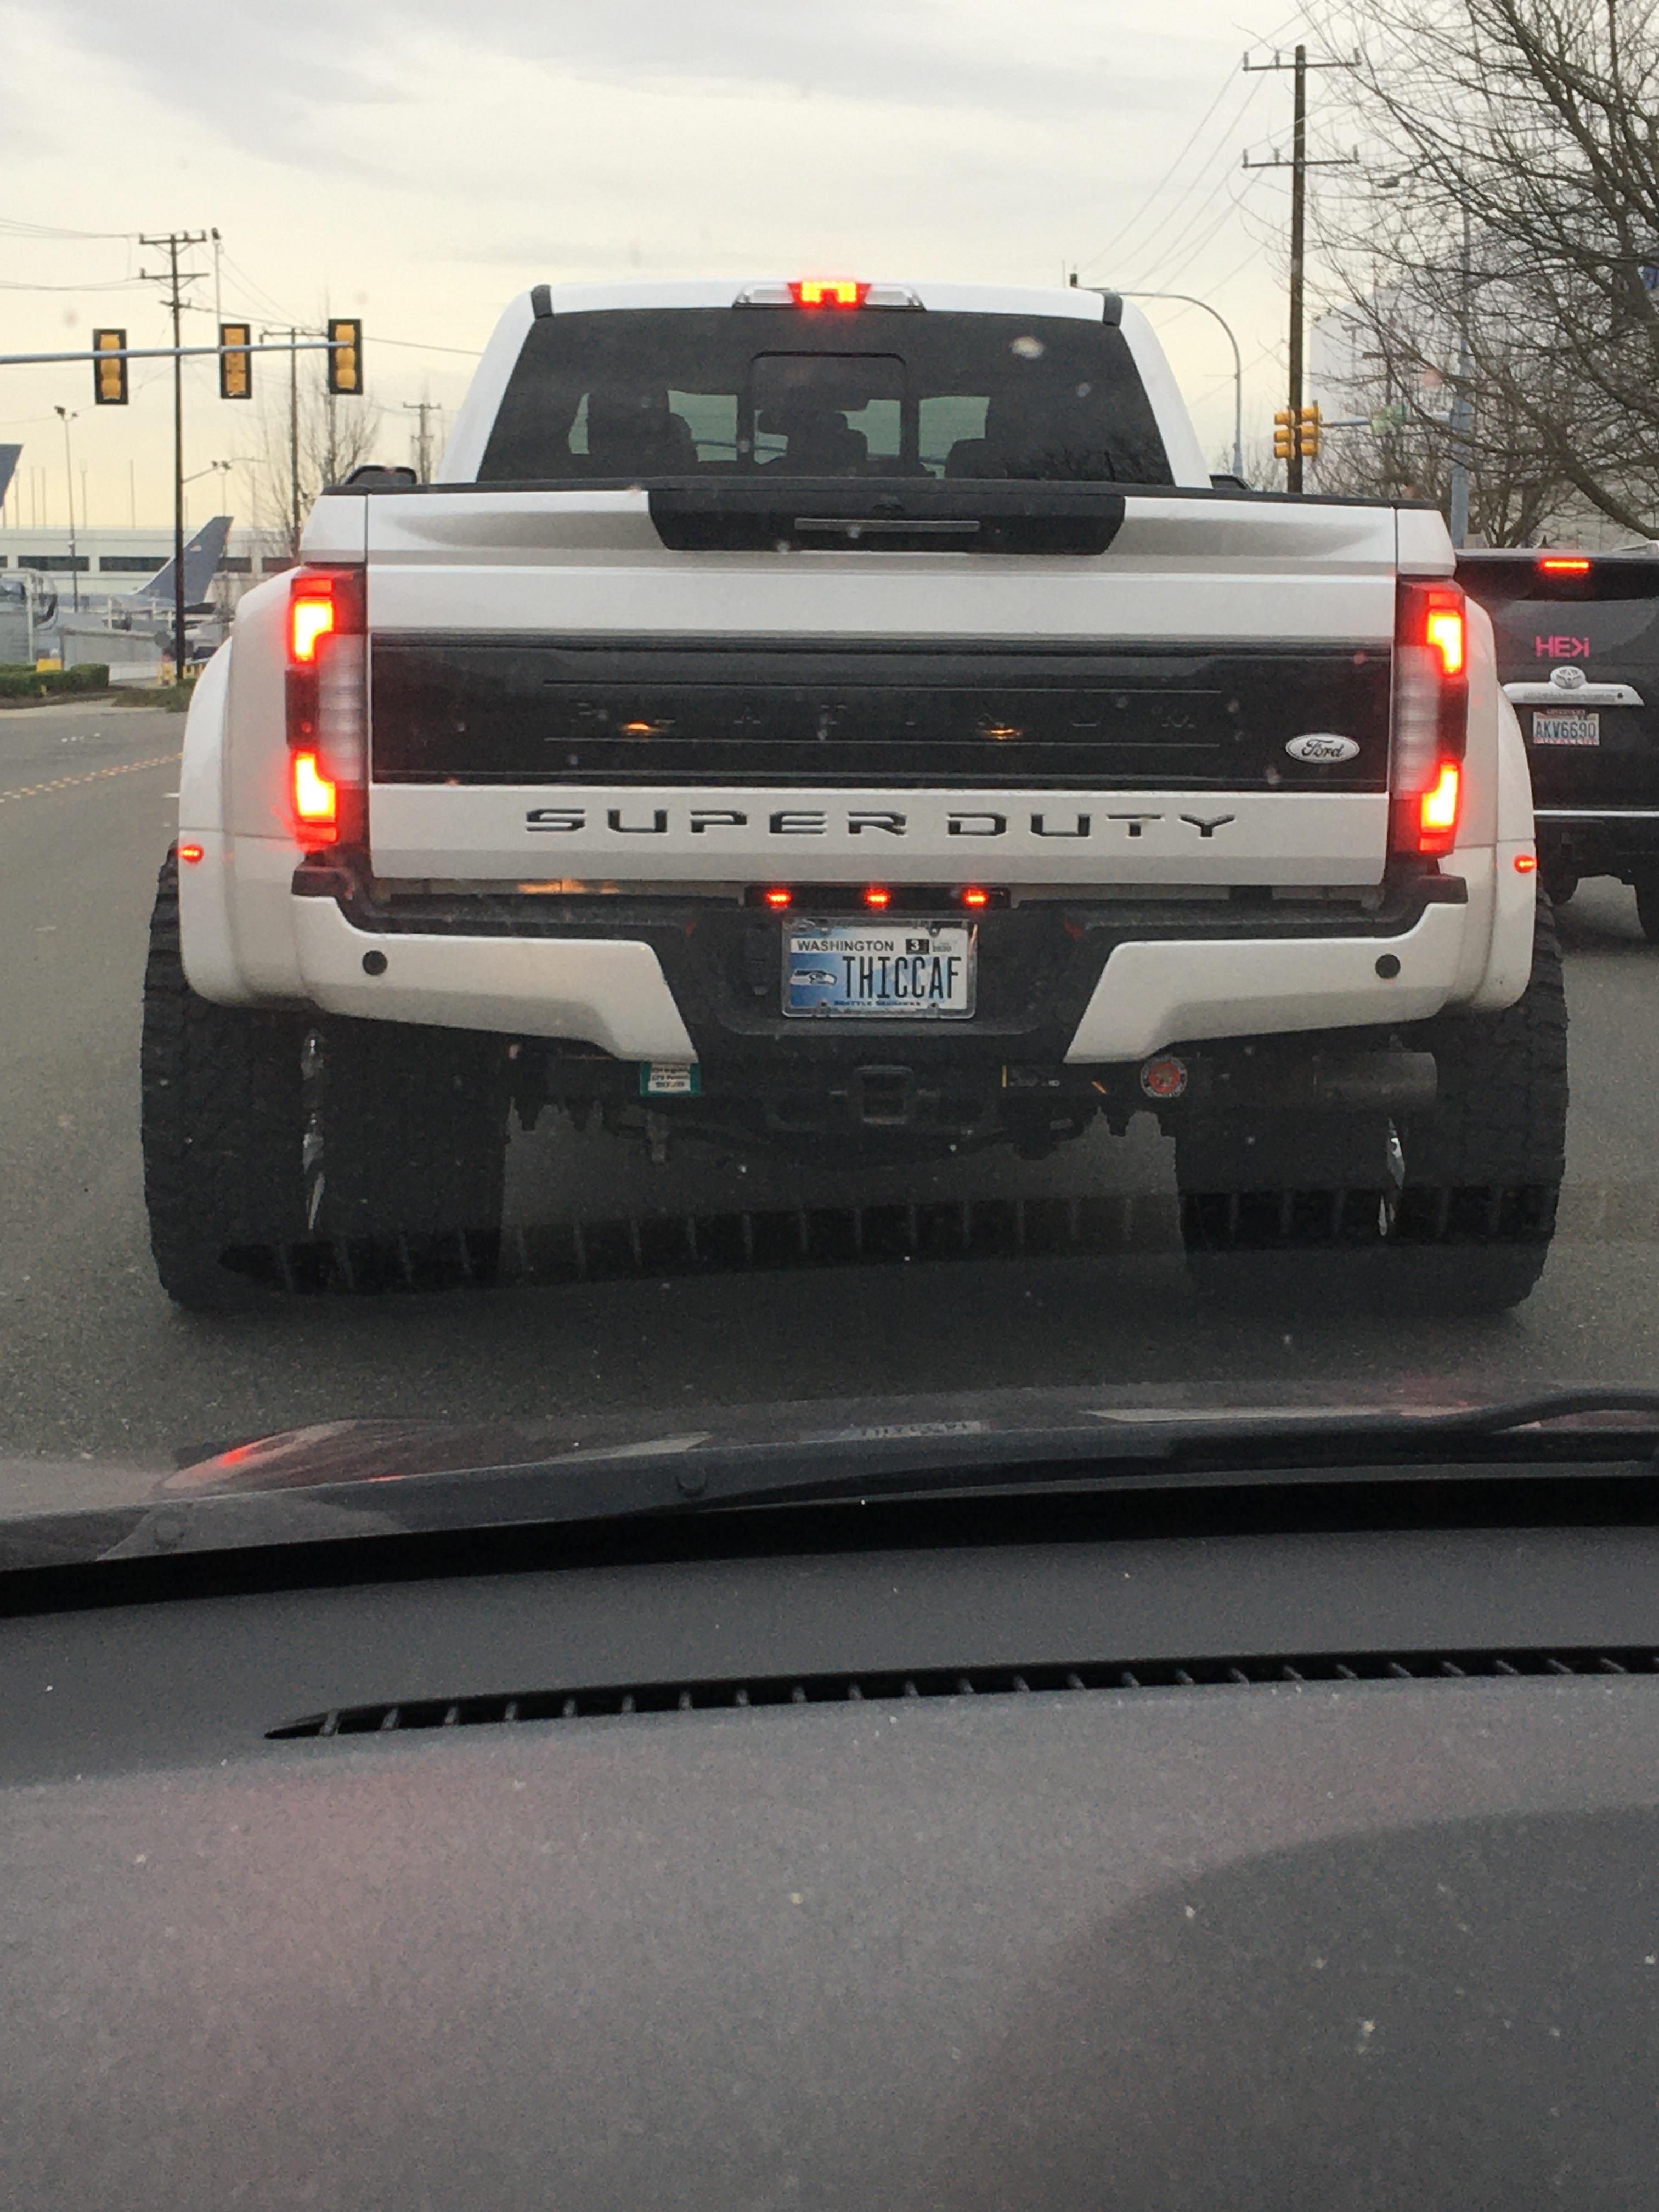 This truck and the license plate I drove home behind today